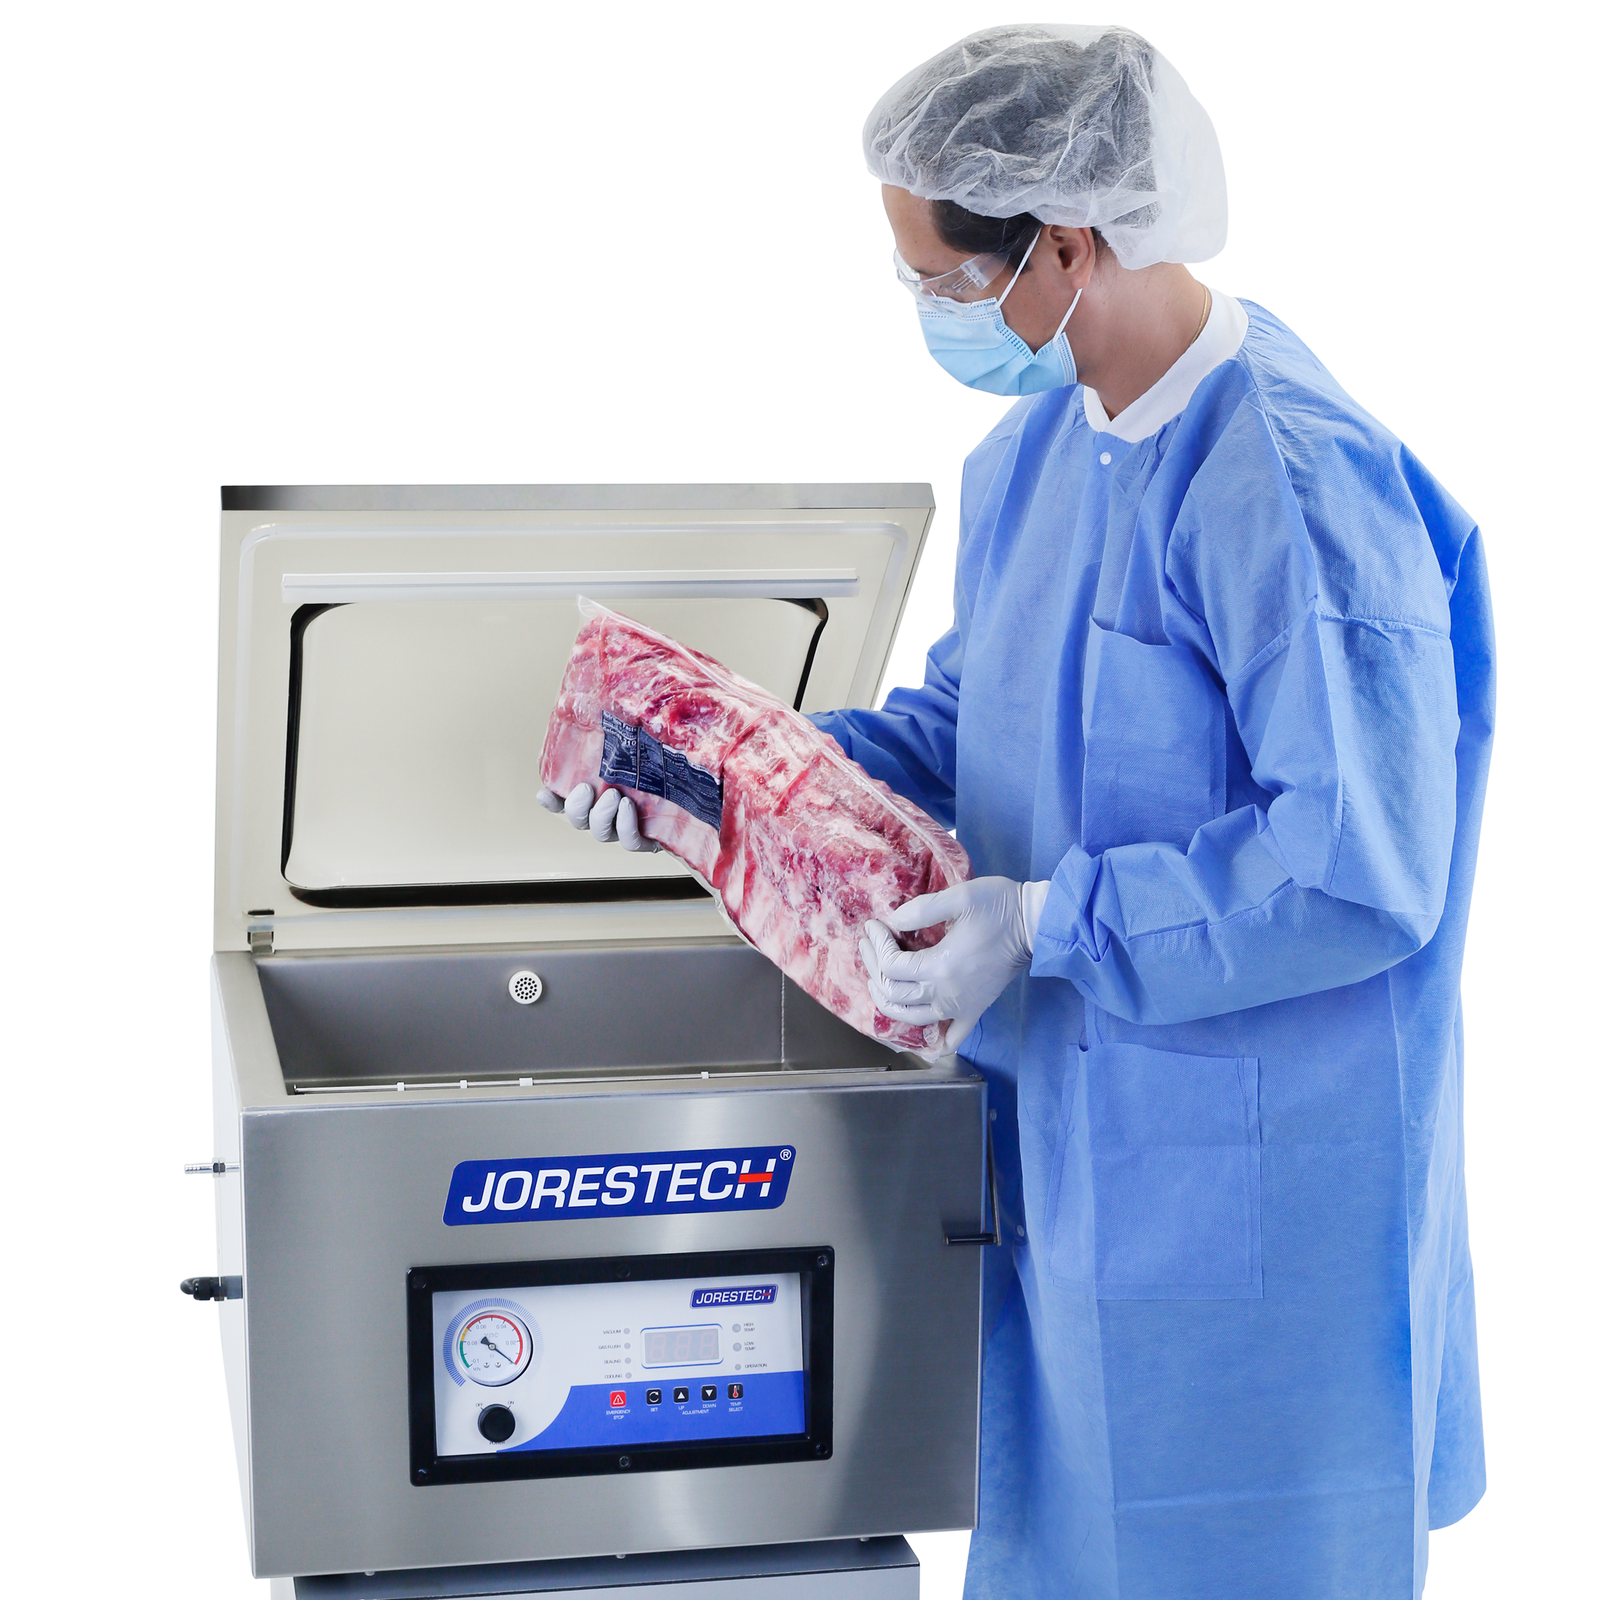 Operator wearing a blue PPE gown, a face mask, latex gloves and a hair net holding a package with freshly sealed red meat. He is removing the vacuumed meat from the inside of the stainless steel table top single chamber vacuum sealer